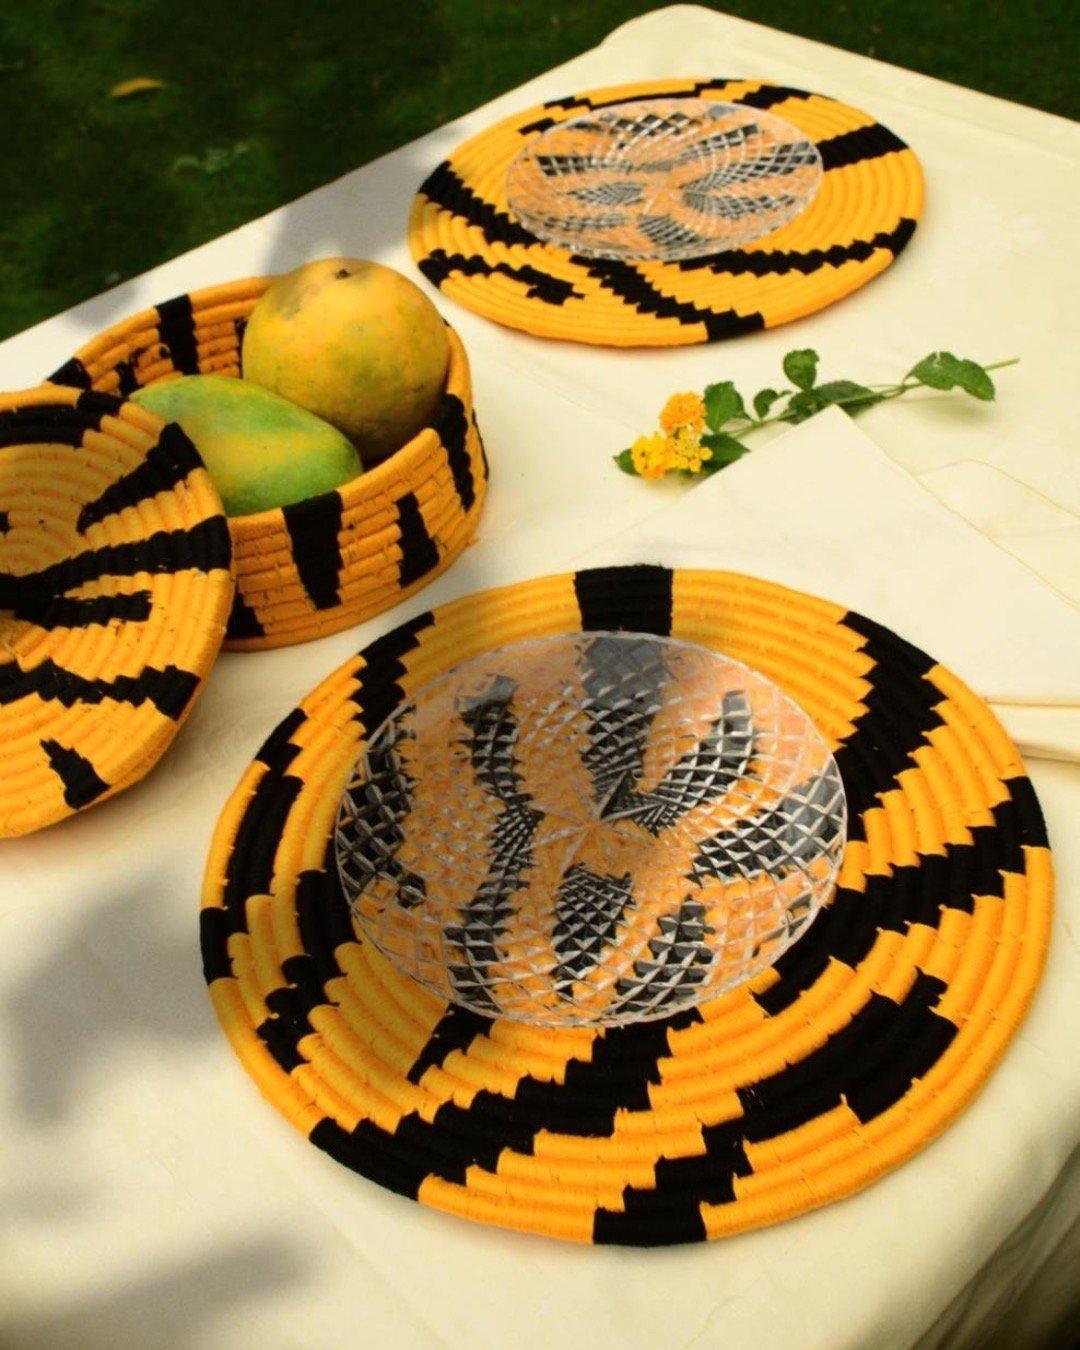 Tiger print Sabai placemats and fruit basket in a table setting with glass plates and mangoes